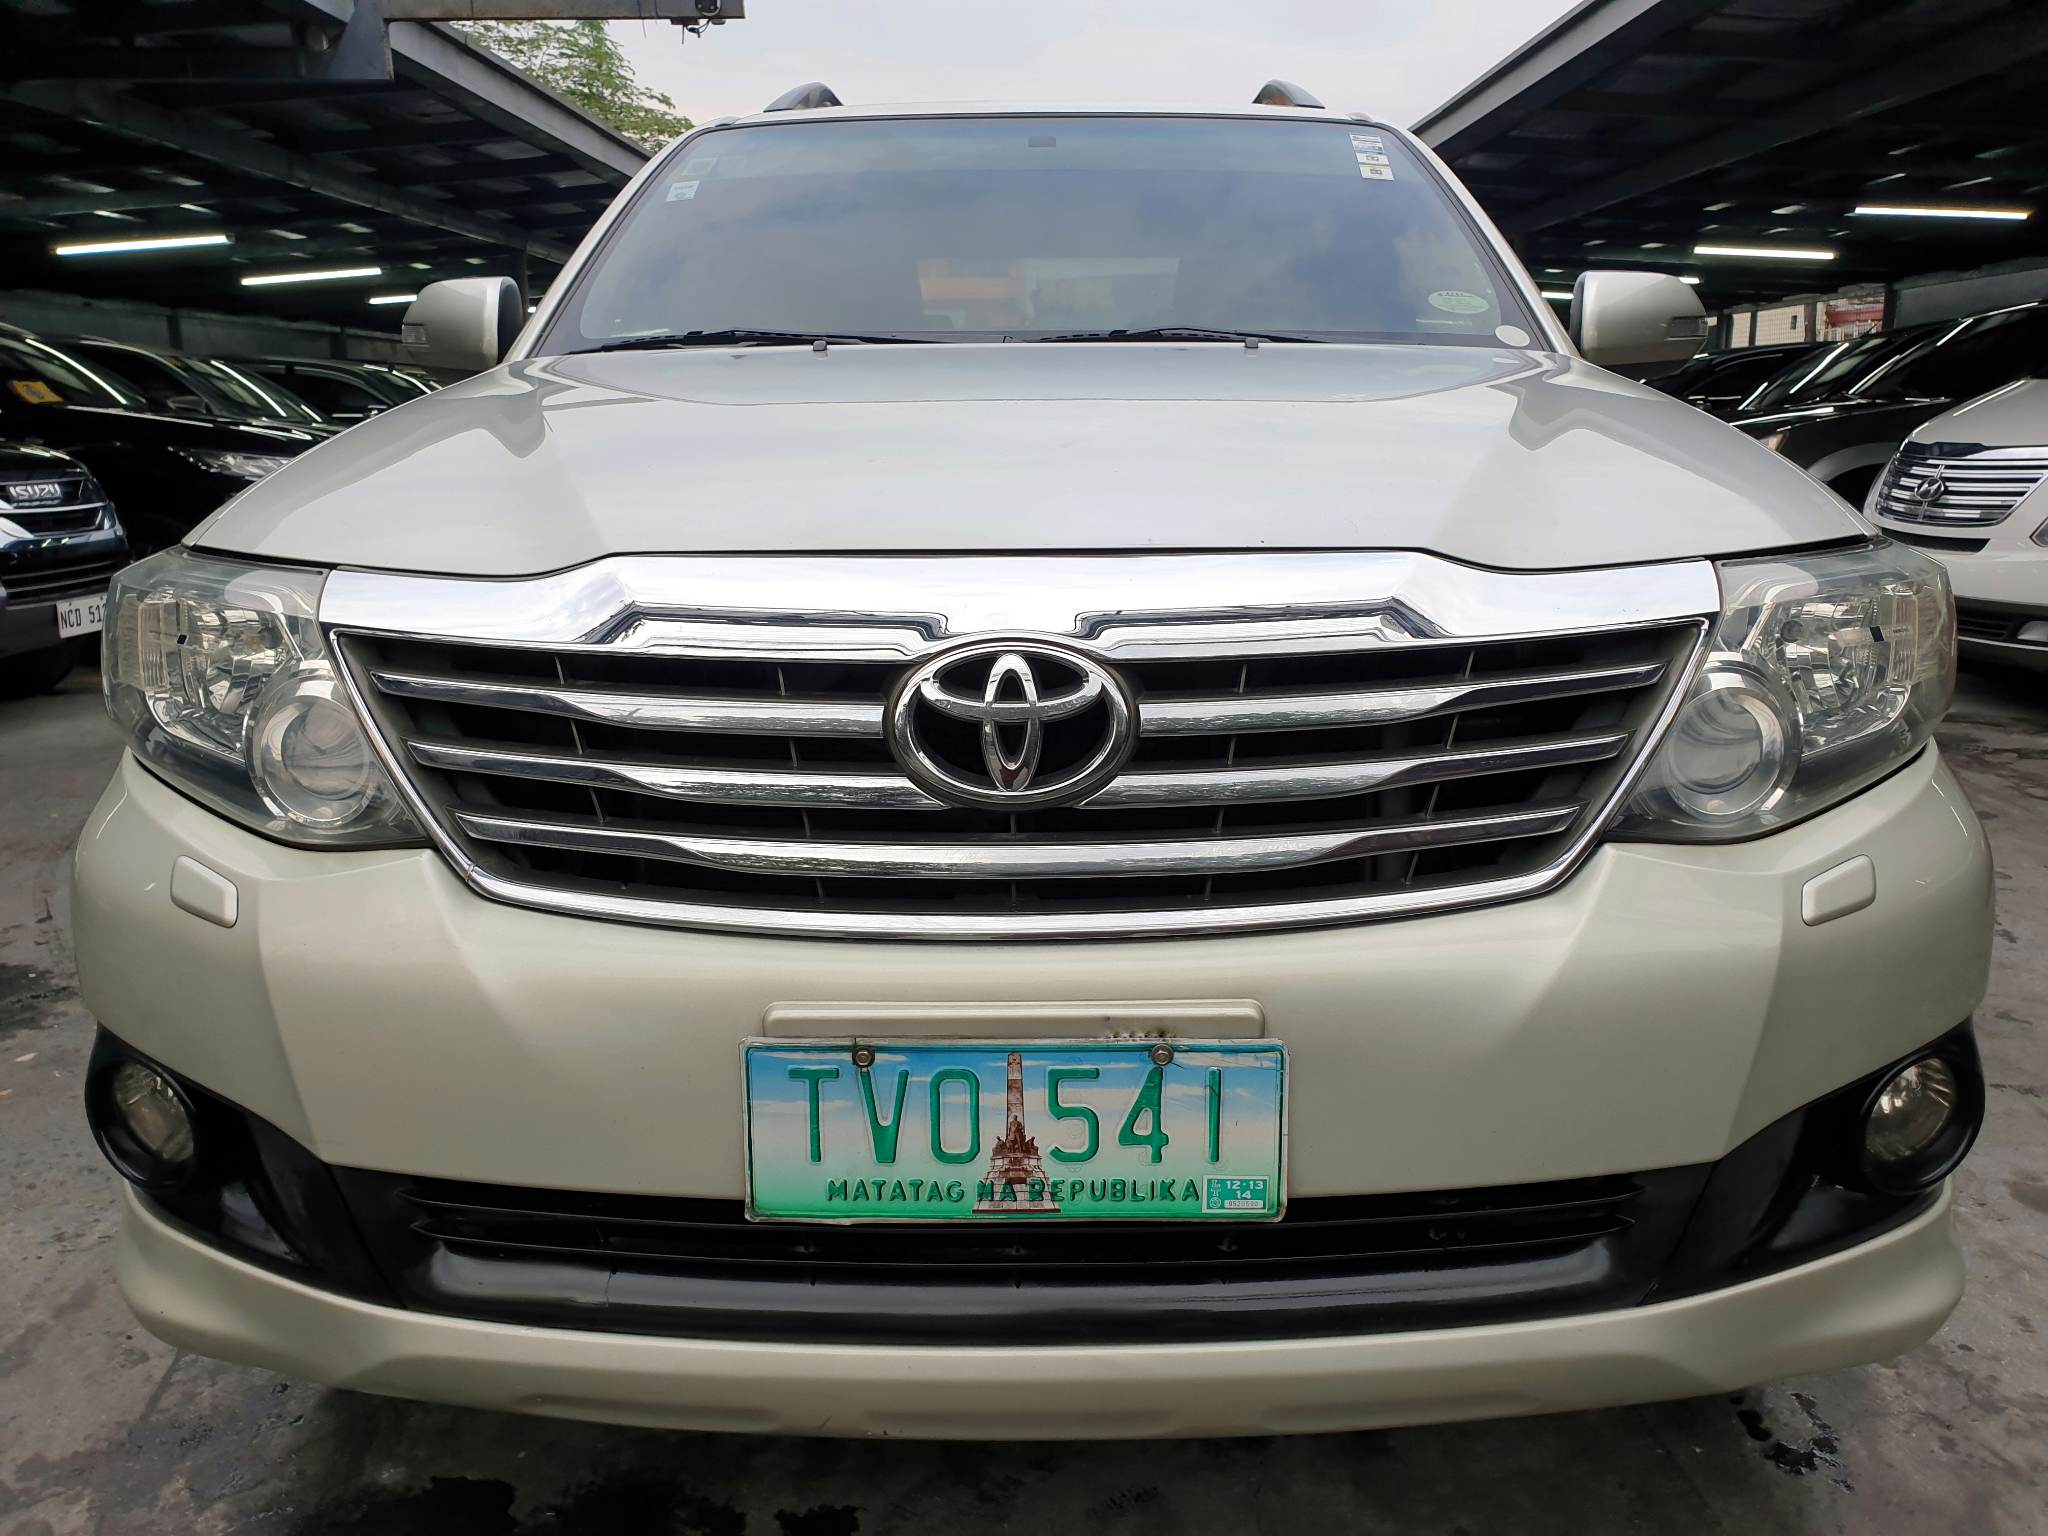 Used 2012 Toyota Fortuner 2.4 G MT